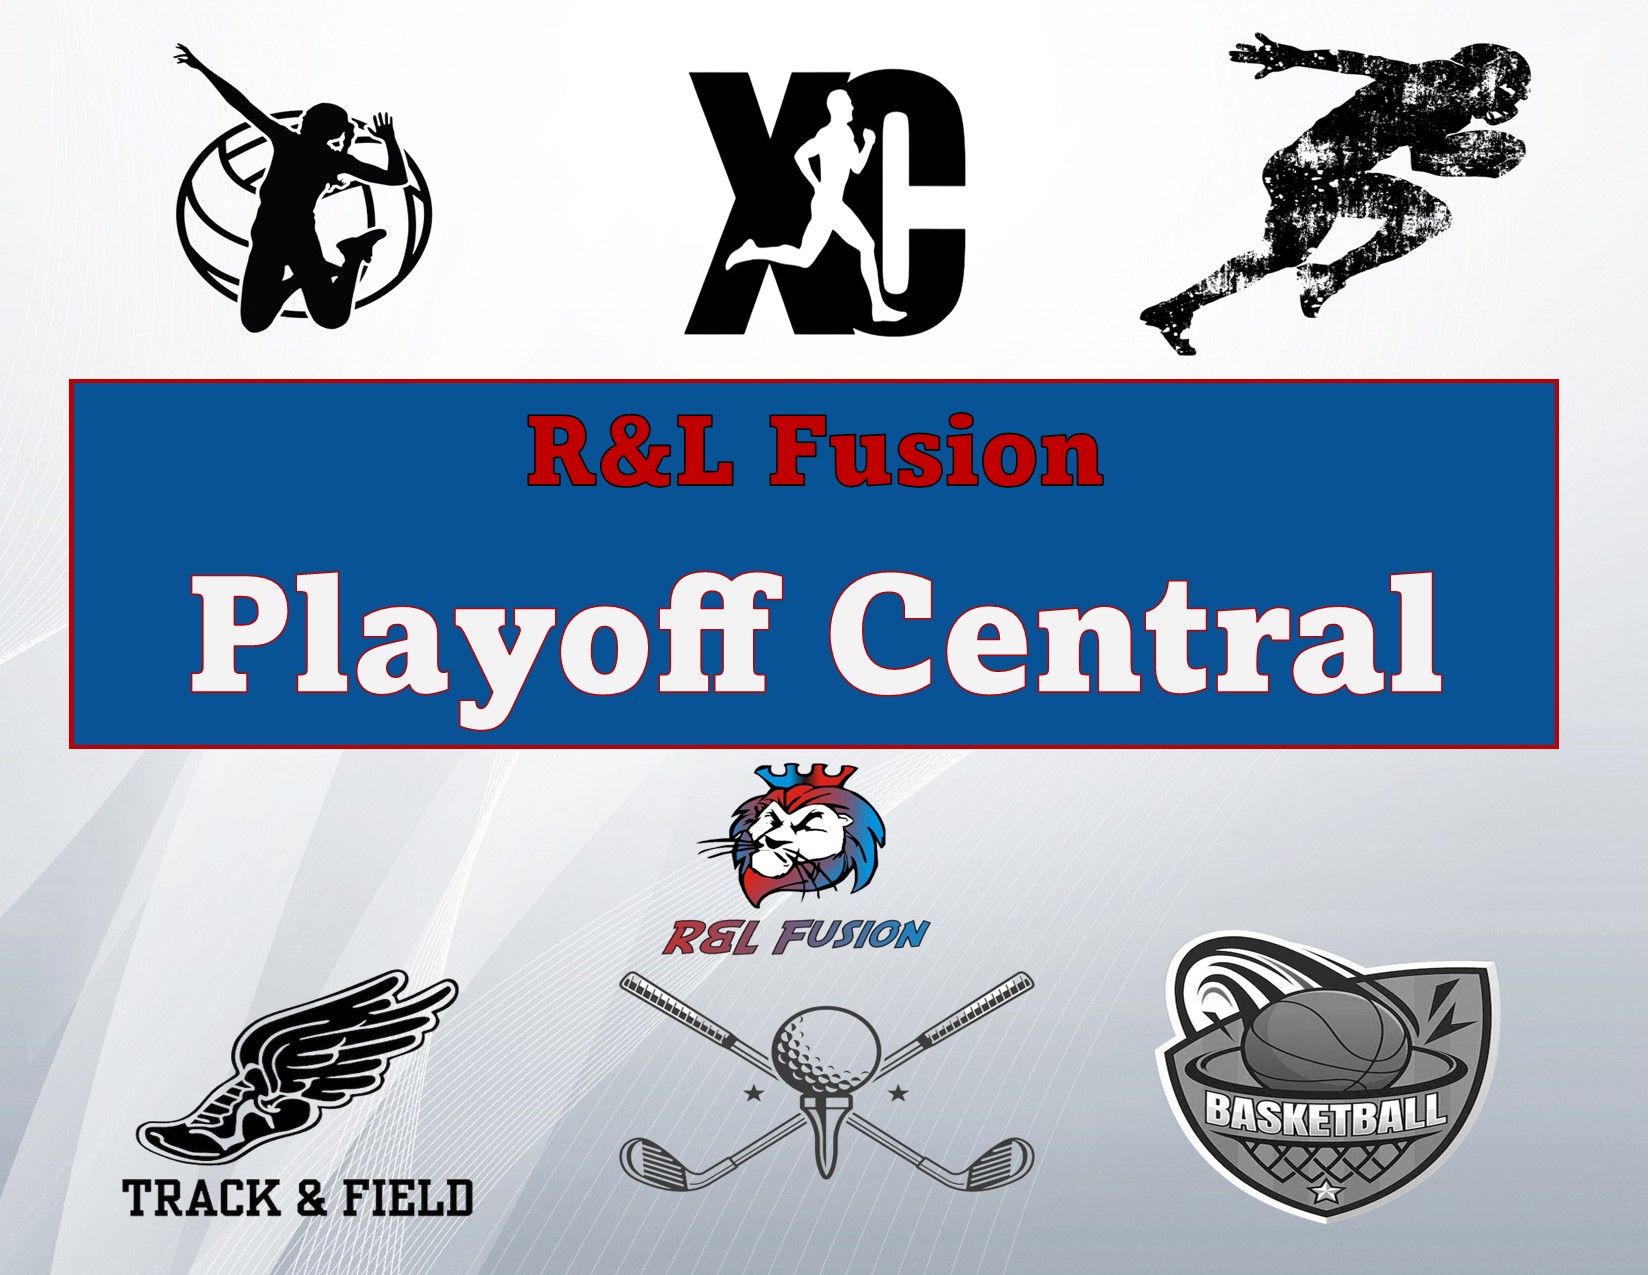 R&L Fusion Playoff Central